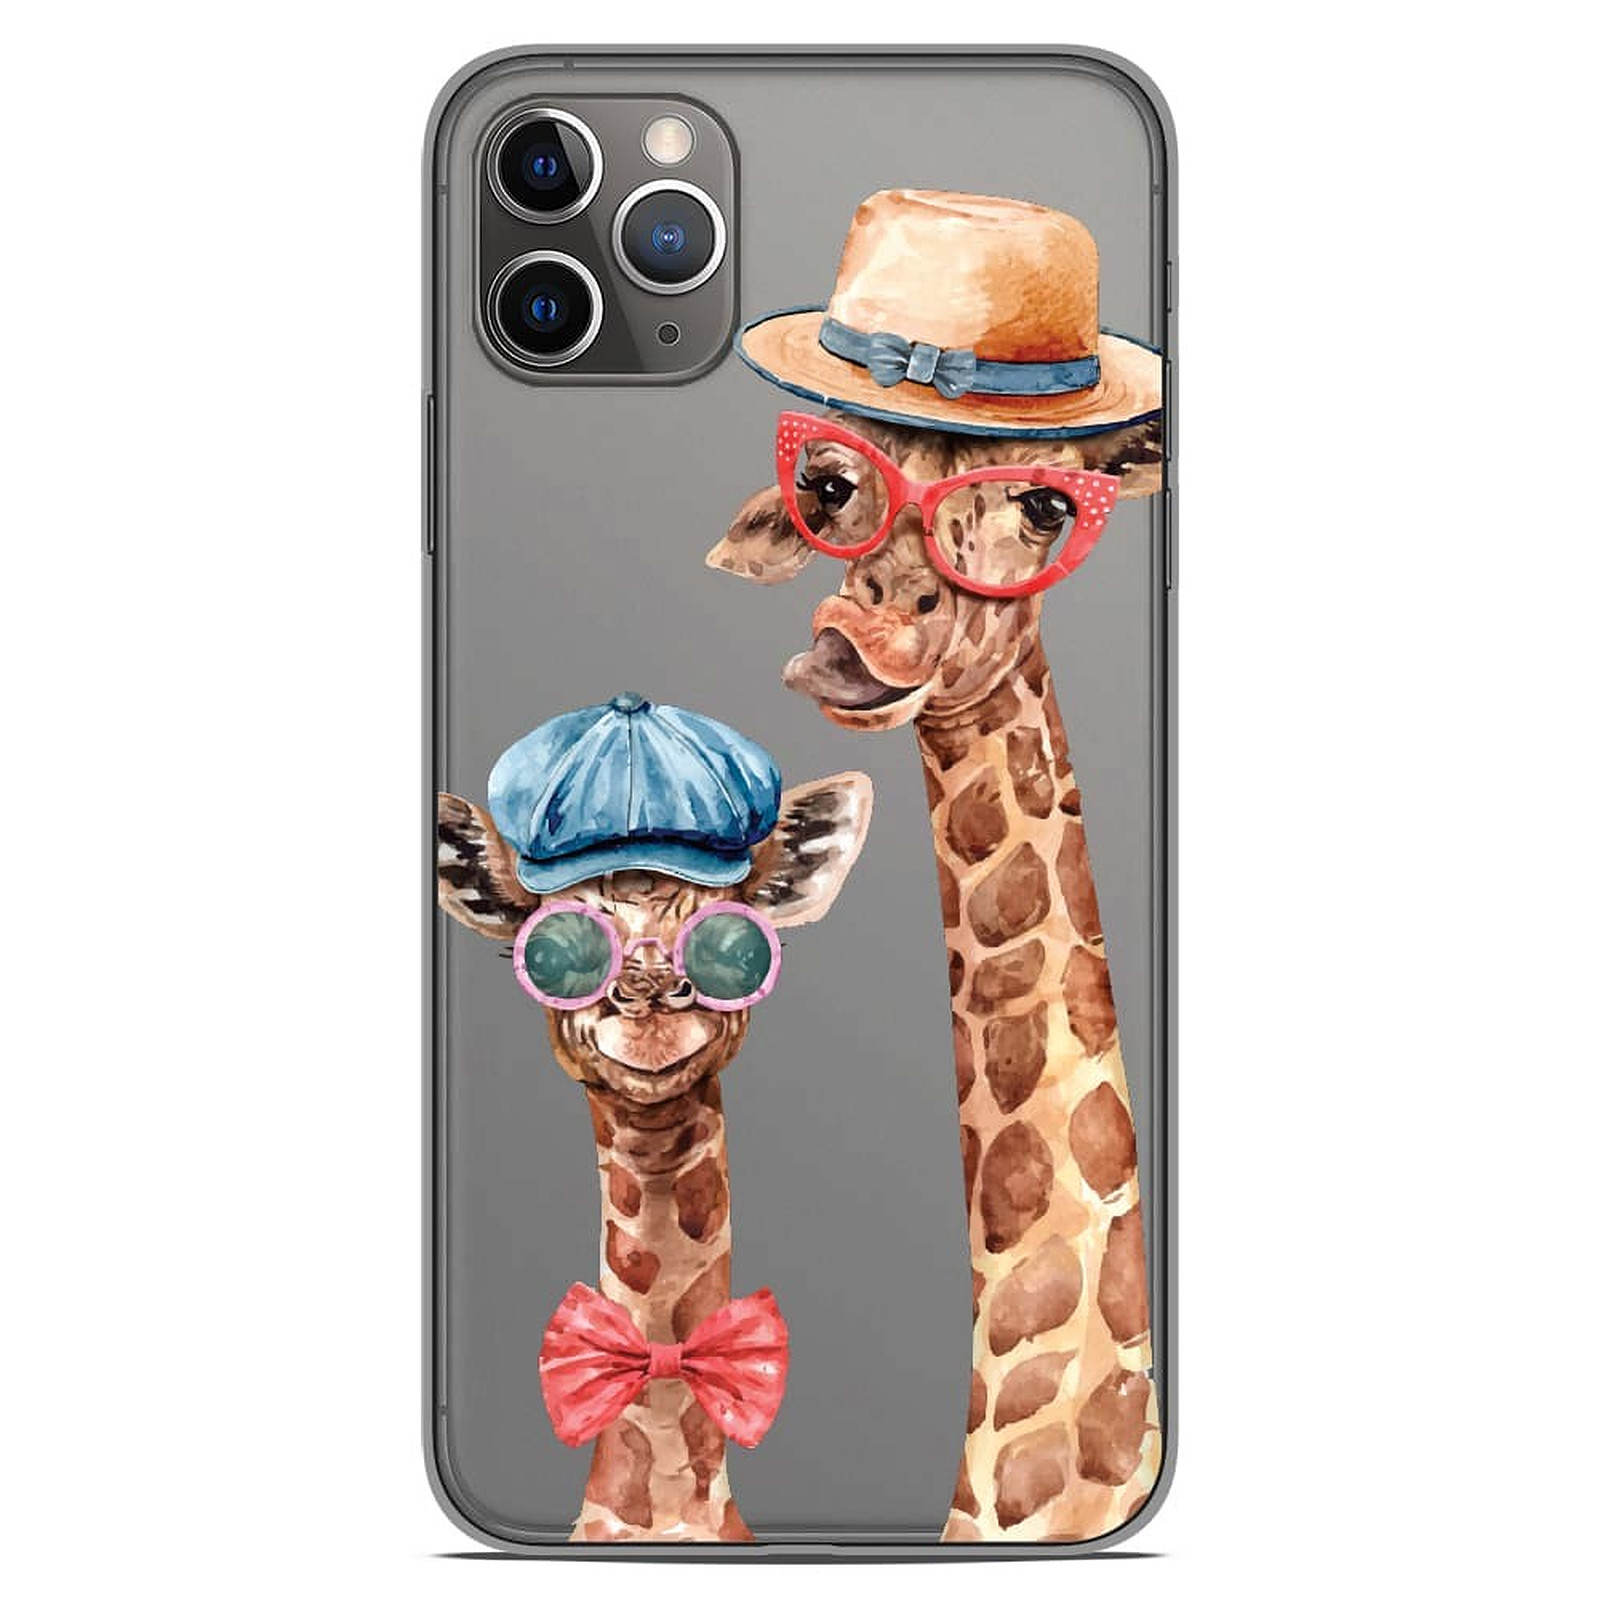 1001 Coques Coque silicone gel Apple iPhone 11 Pro Max motif Funny Girafe - Coque telephone 1001Coques